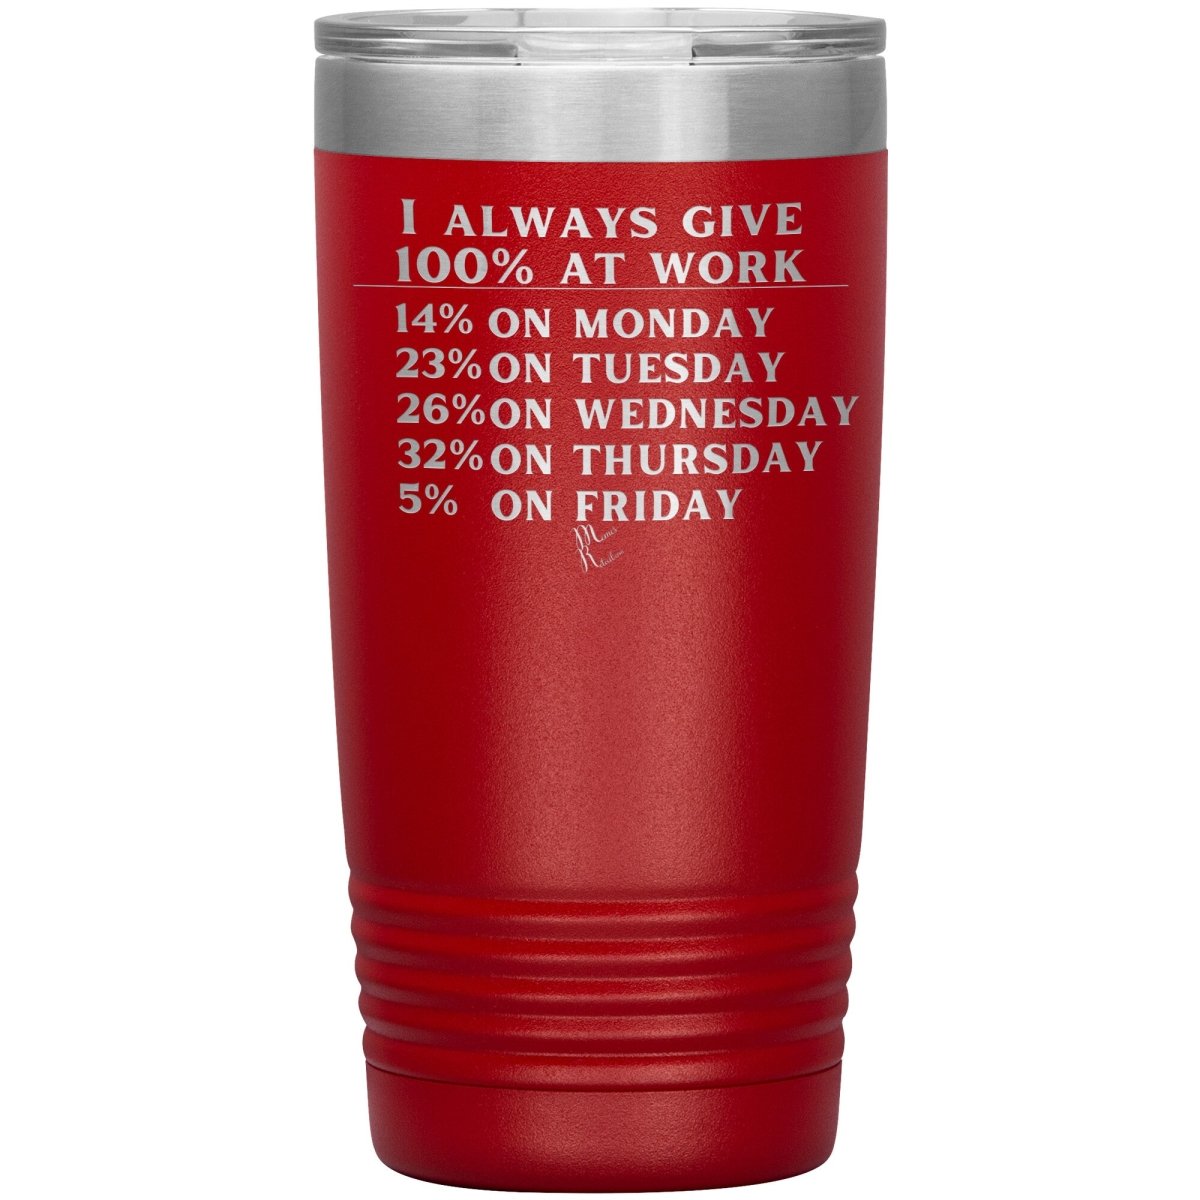 I Always Give 100% At Work Tumblers, 20oz Insulated Tumbler / Red - MemesRetail.com